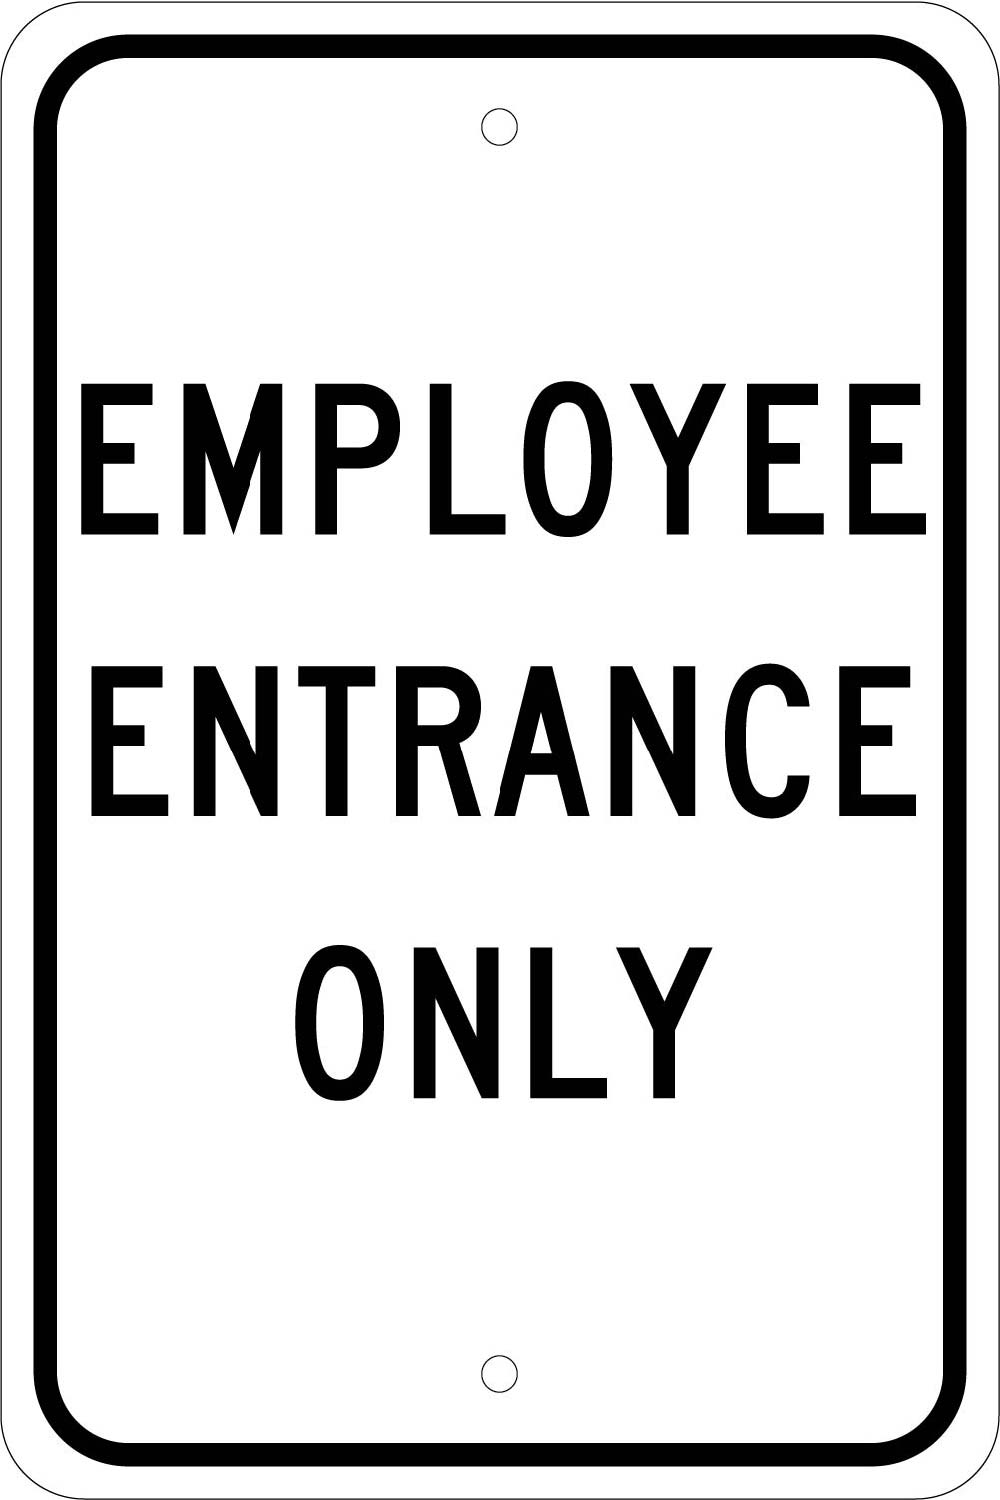 Employee Entrance Only Sign-eSafety Supplies, Inc